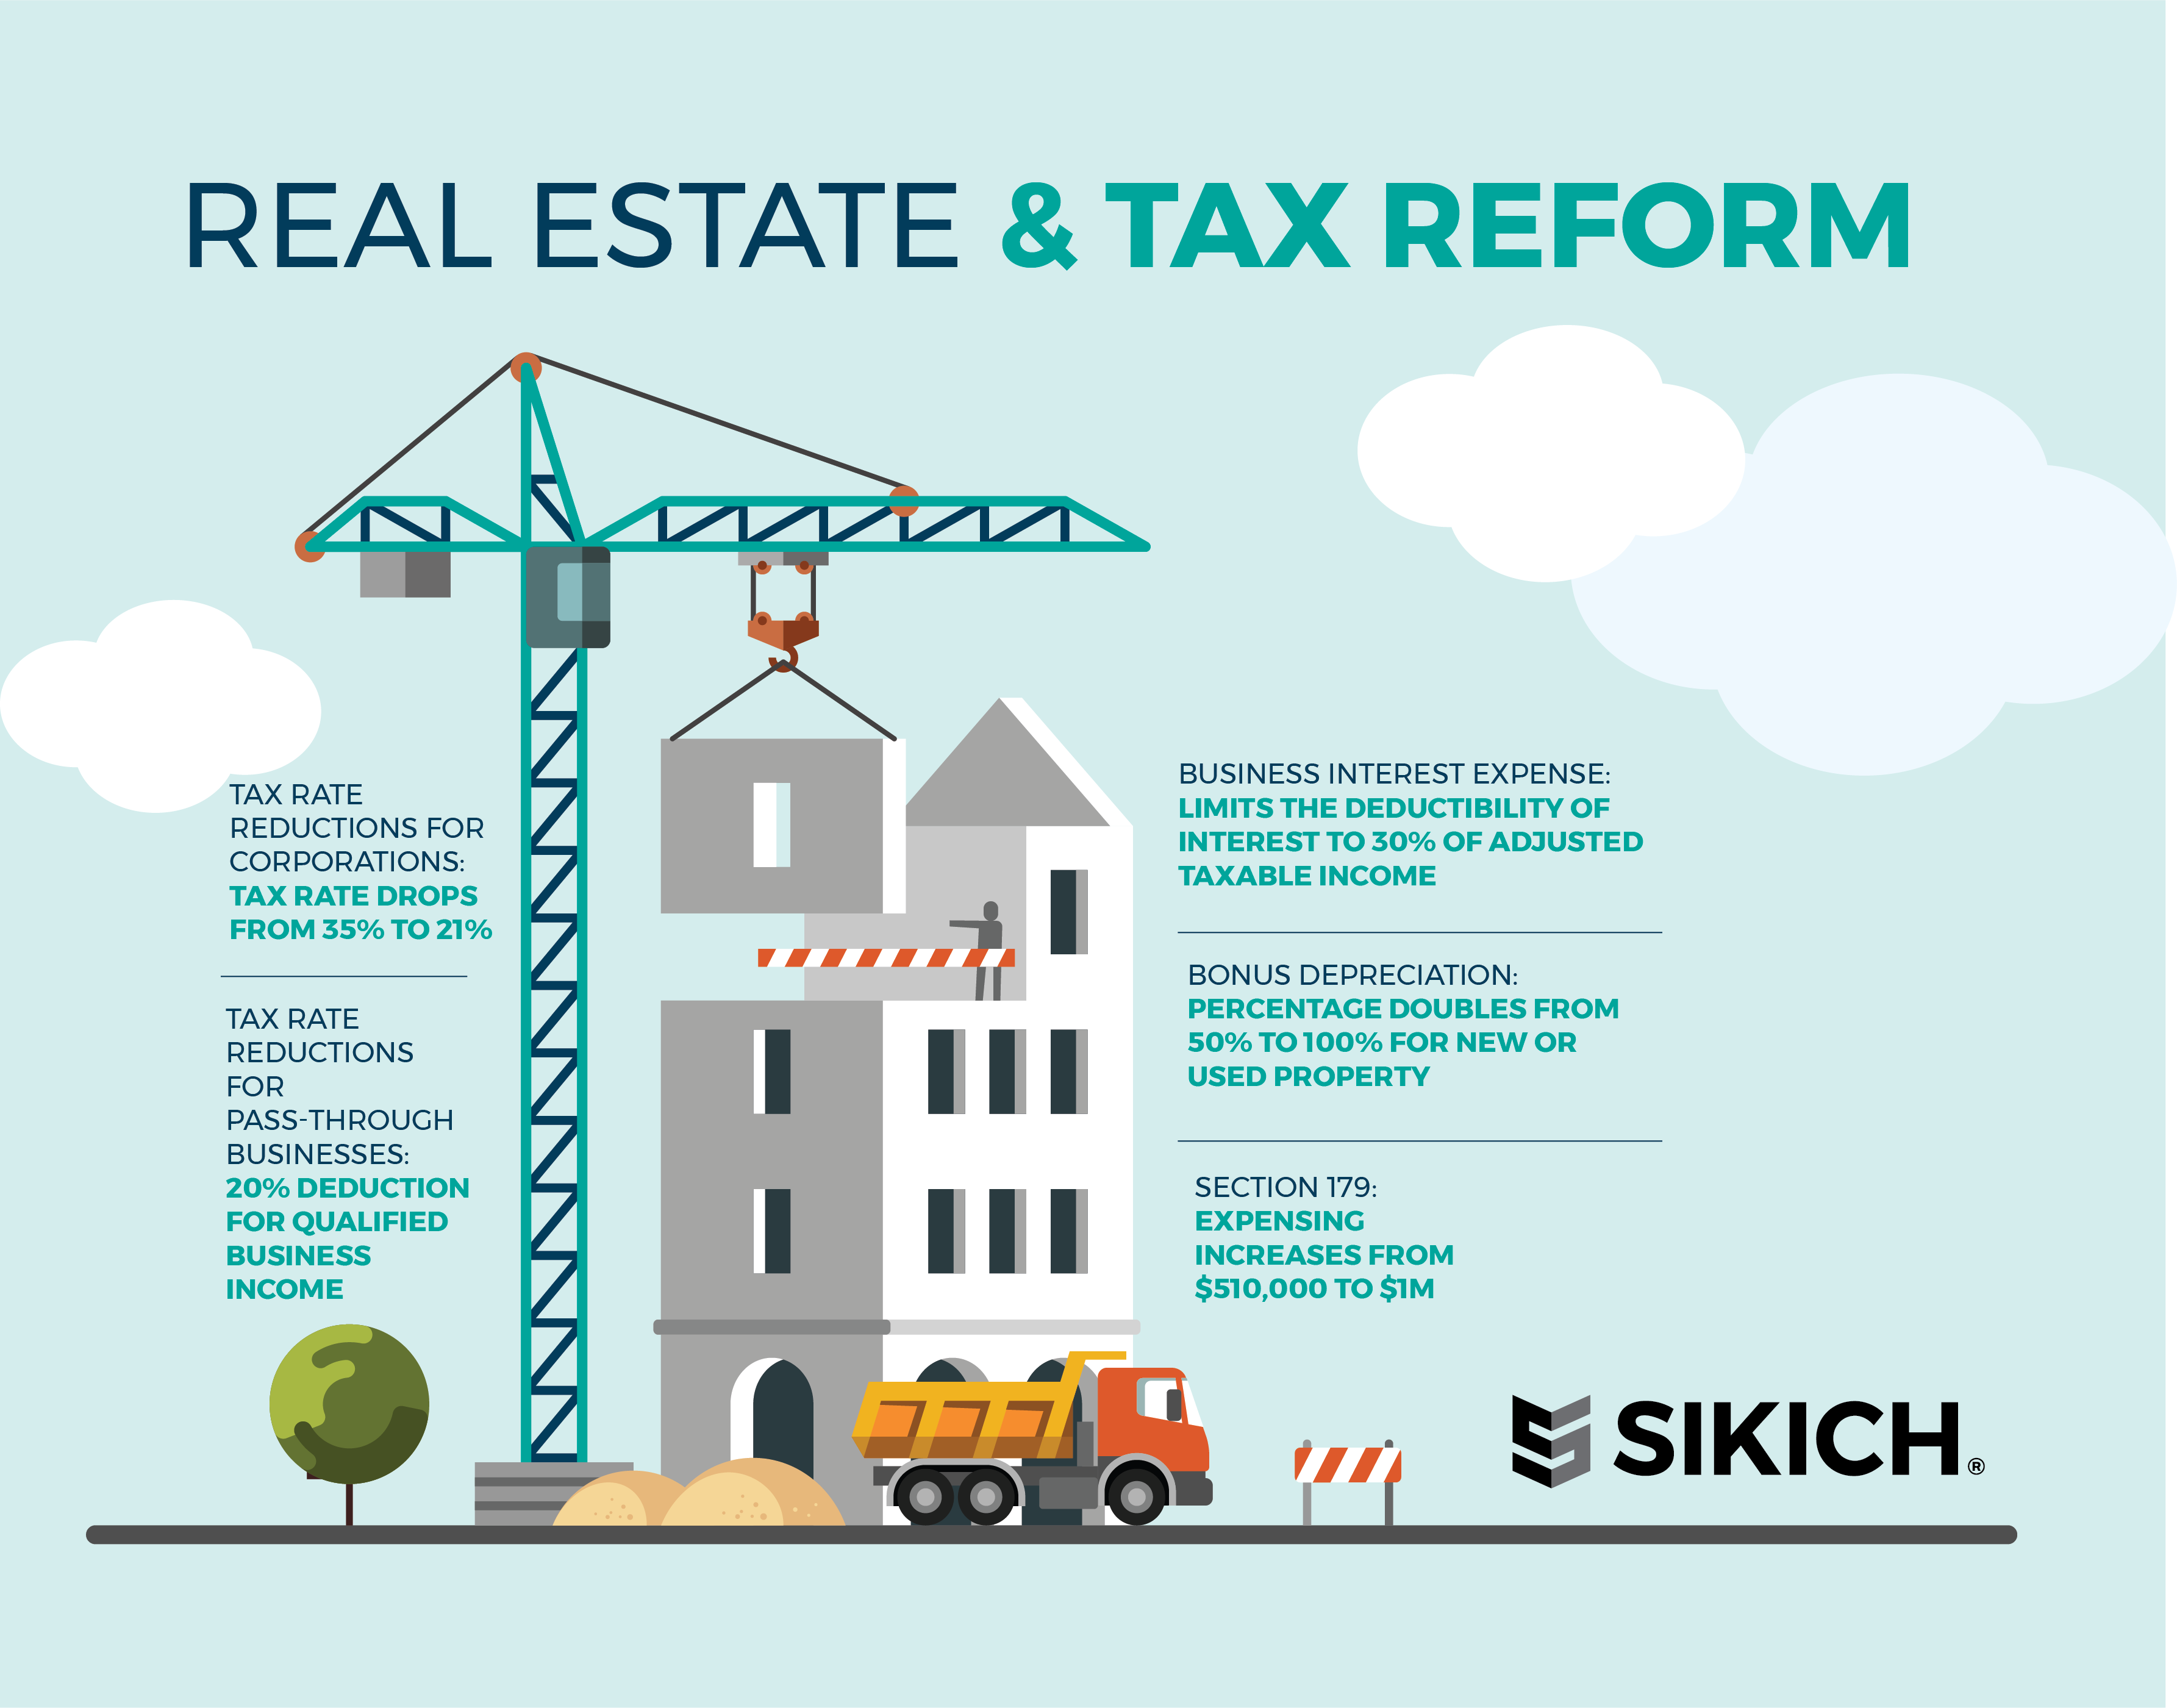 Sikich Real Estate and Tax Reform Infographic